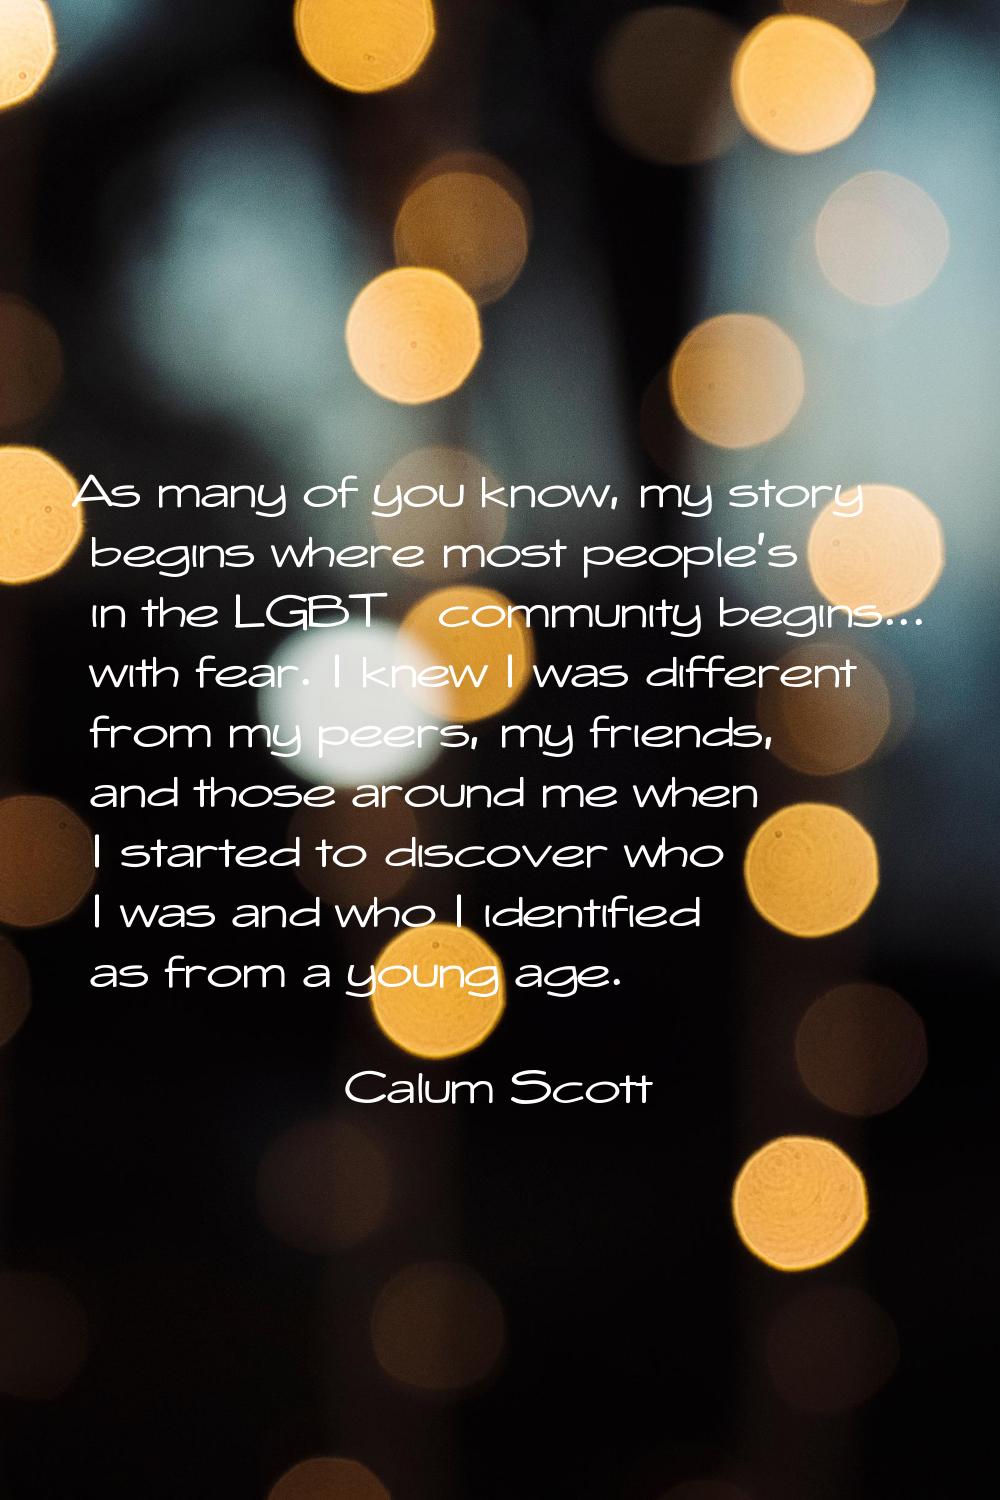 As many of you know, my story begins where most people's in the LGBT+ community begins... with fear